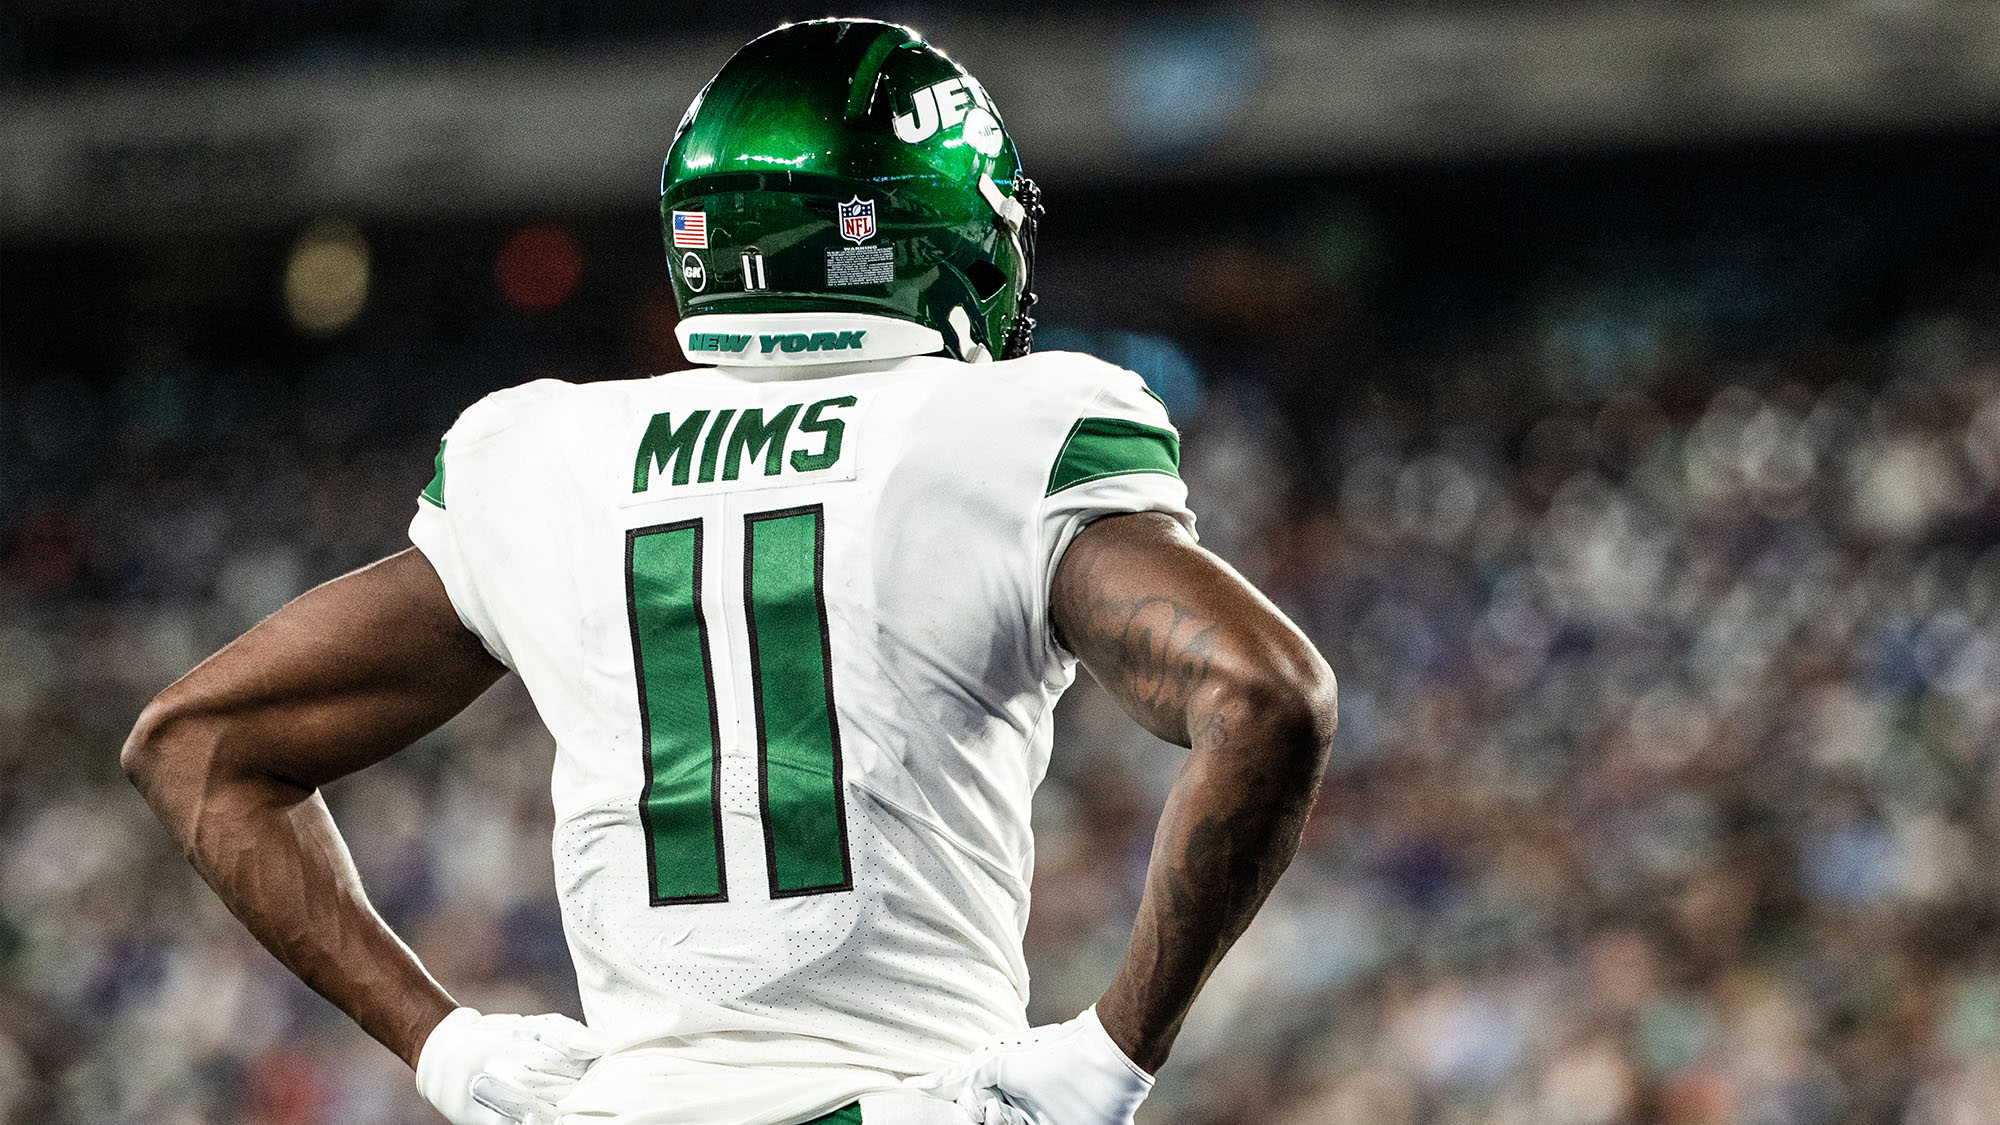 Denzel Mims was a winner for the NY Jets in their 2021 preseason opener against the NY Giants.